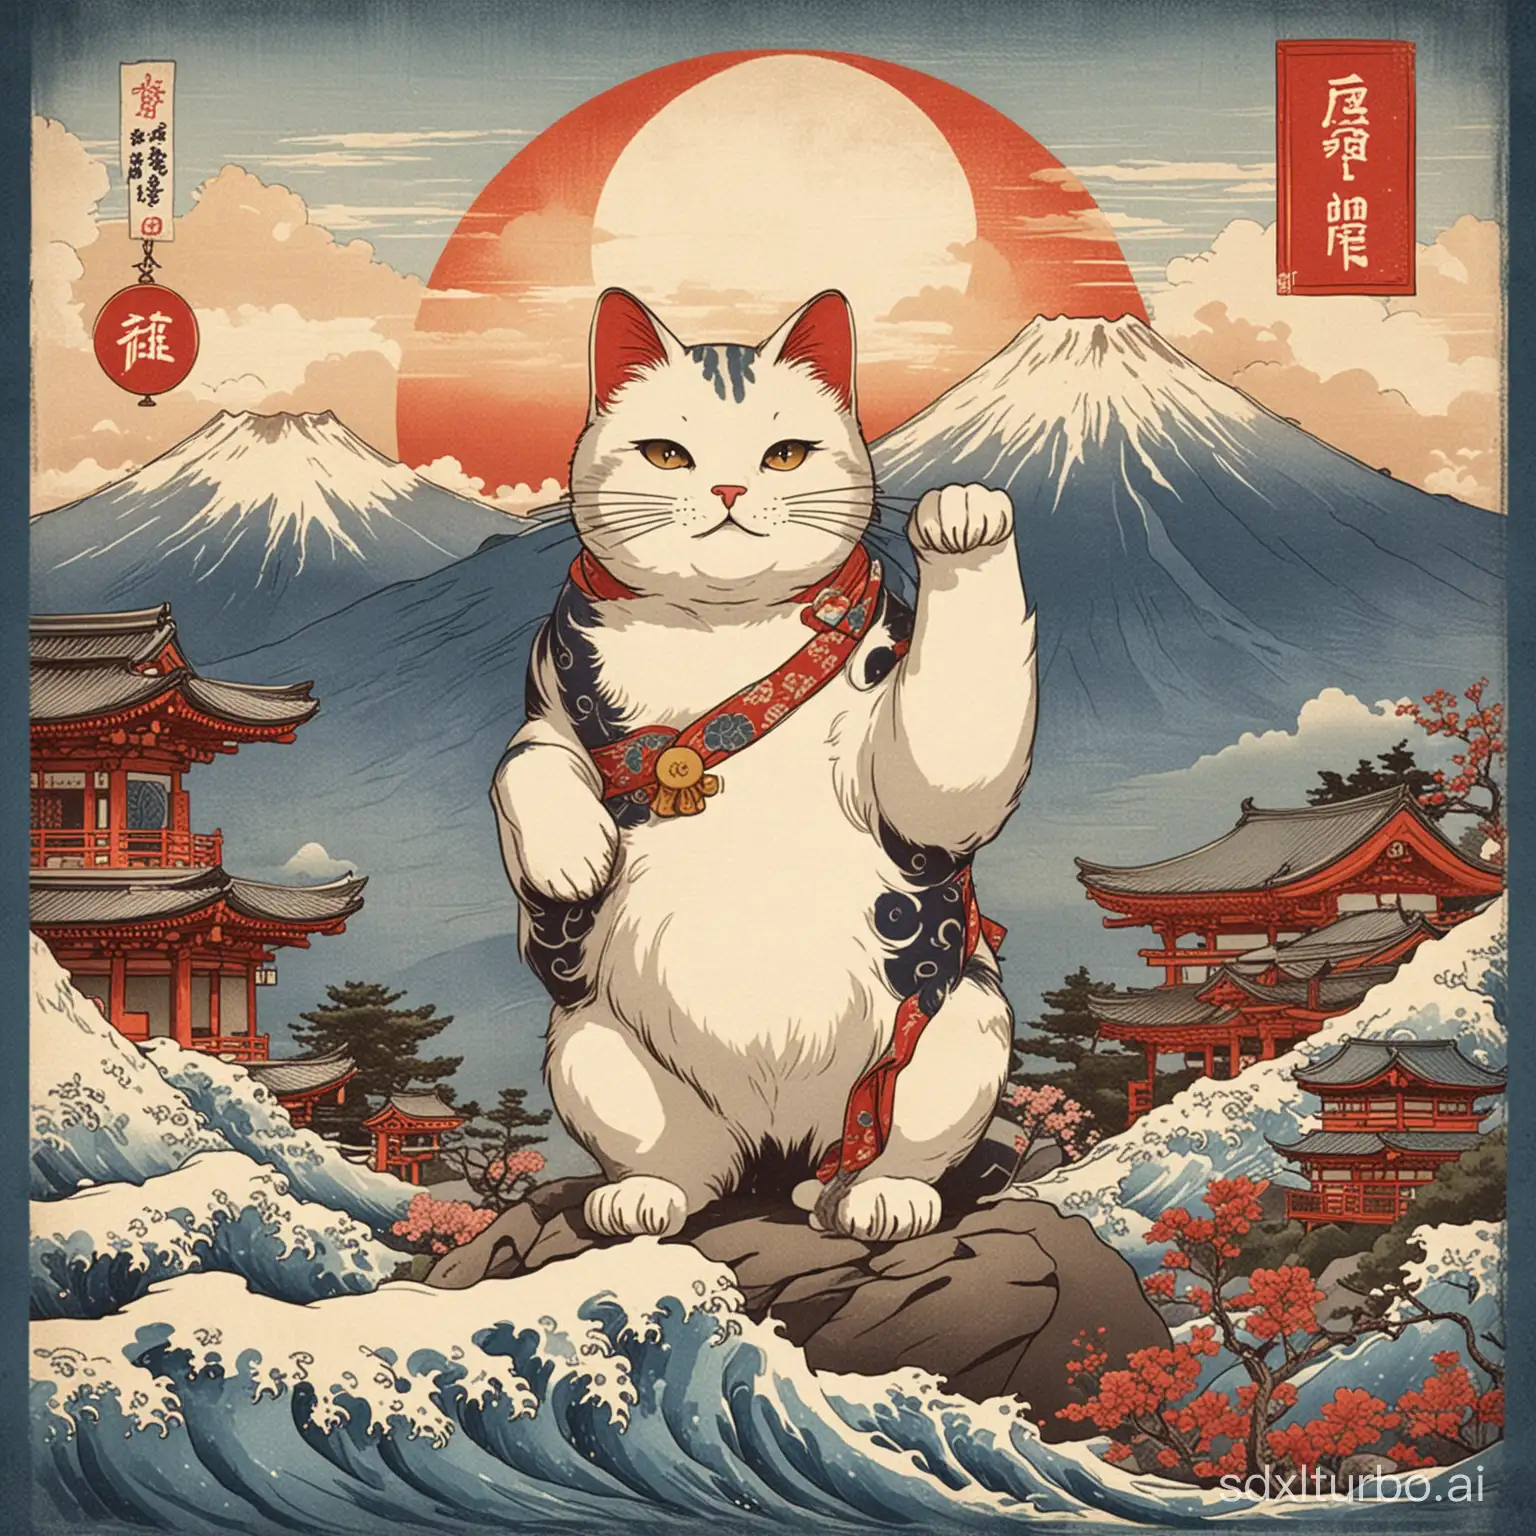 Retro Japanese postcard in Ukiyo-e style showing a Lucky Cat standing on Mount Fuji, vintage colors including dark blue and red tones with Ukiyo-e waves on a white background, very detailed artwork.